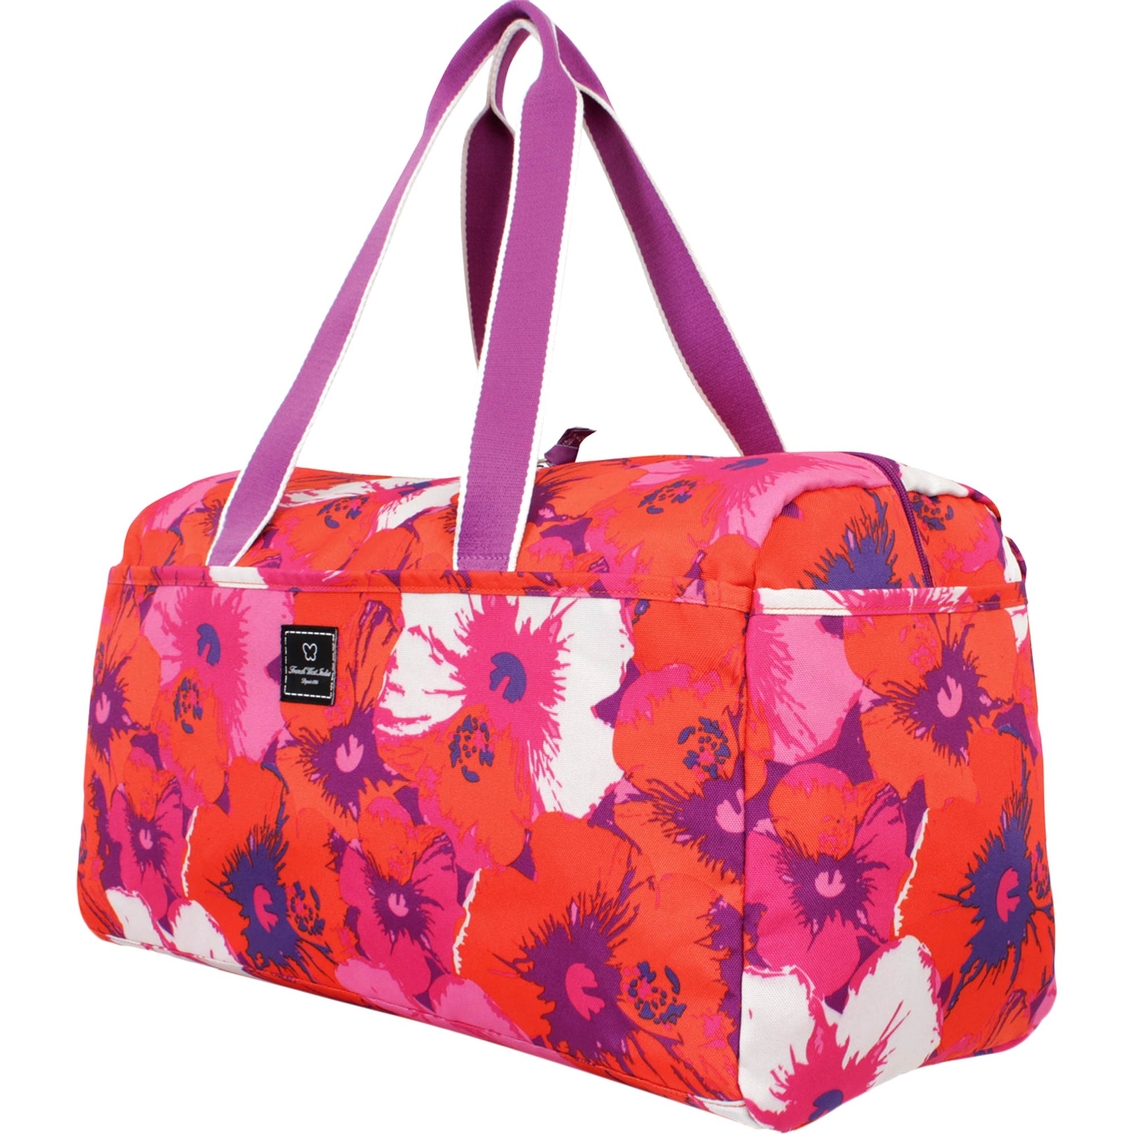 French West Indies 20 In. Soft Duffel | Luggage | Clothing ...